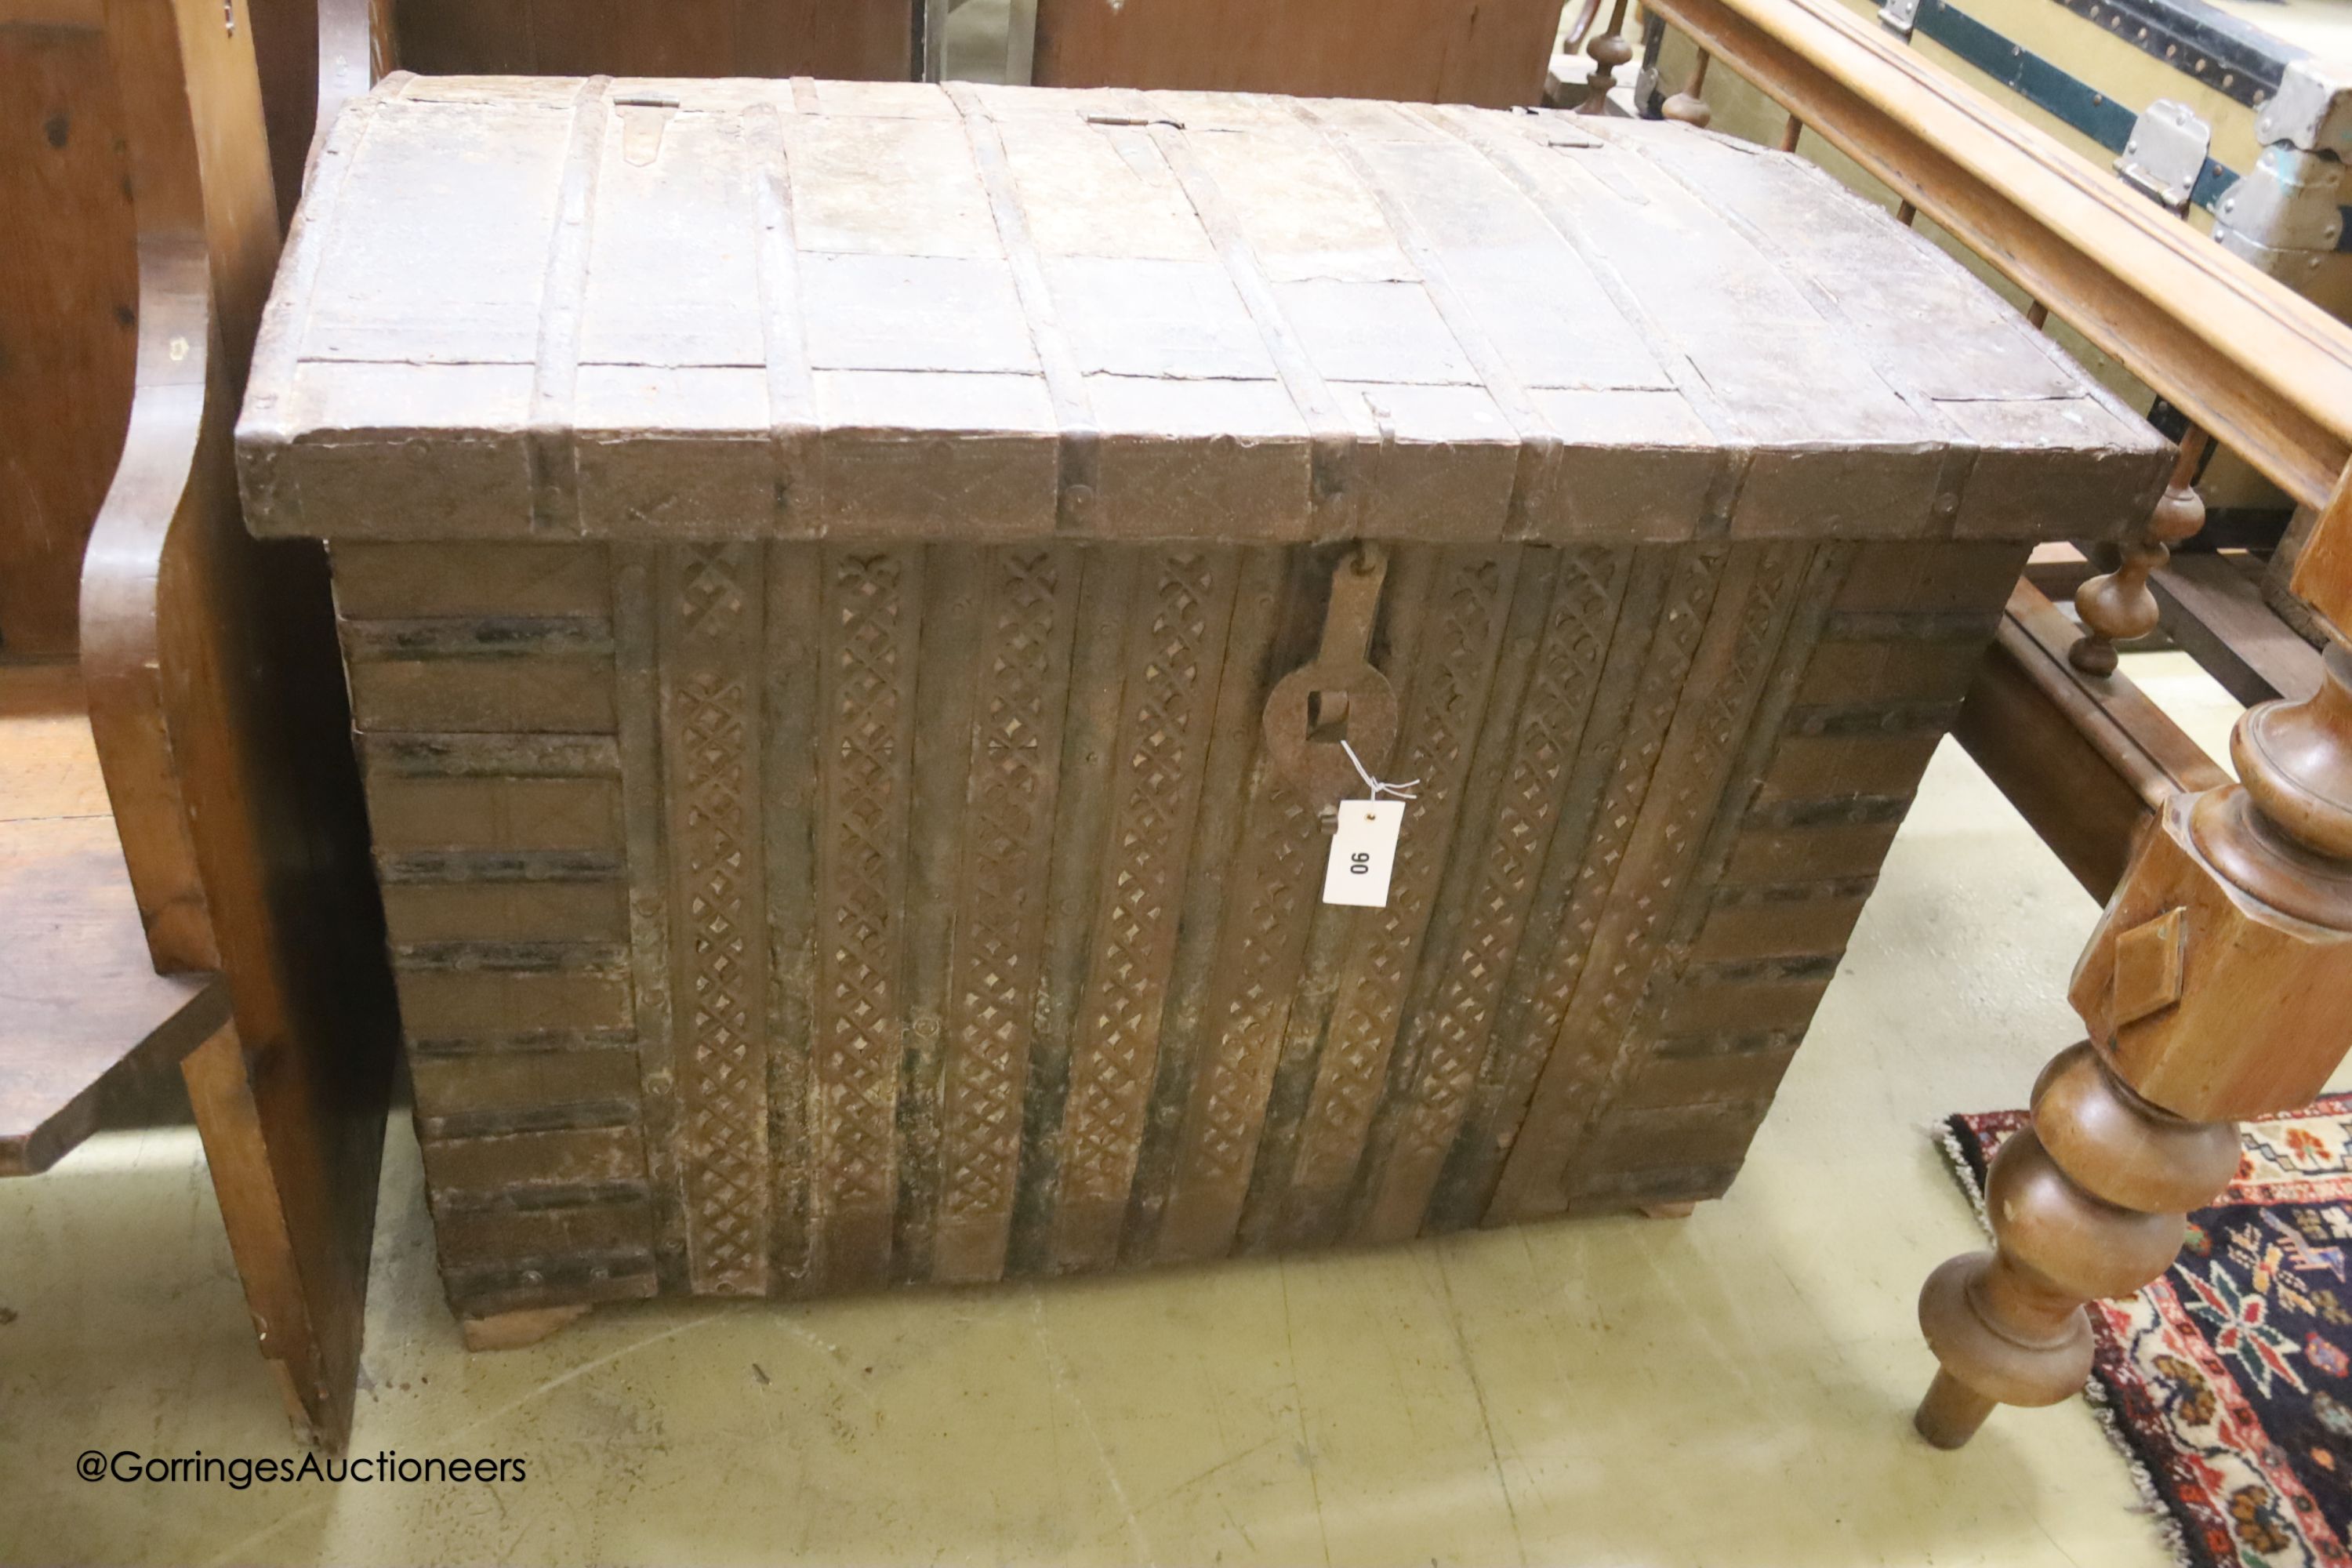 A 19th century Indian iron mounted domed top trunk, length 97cm, depth 58cm, height 70cm